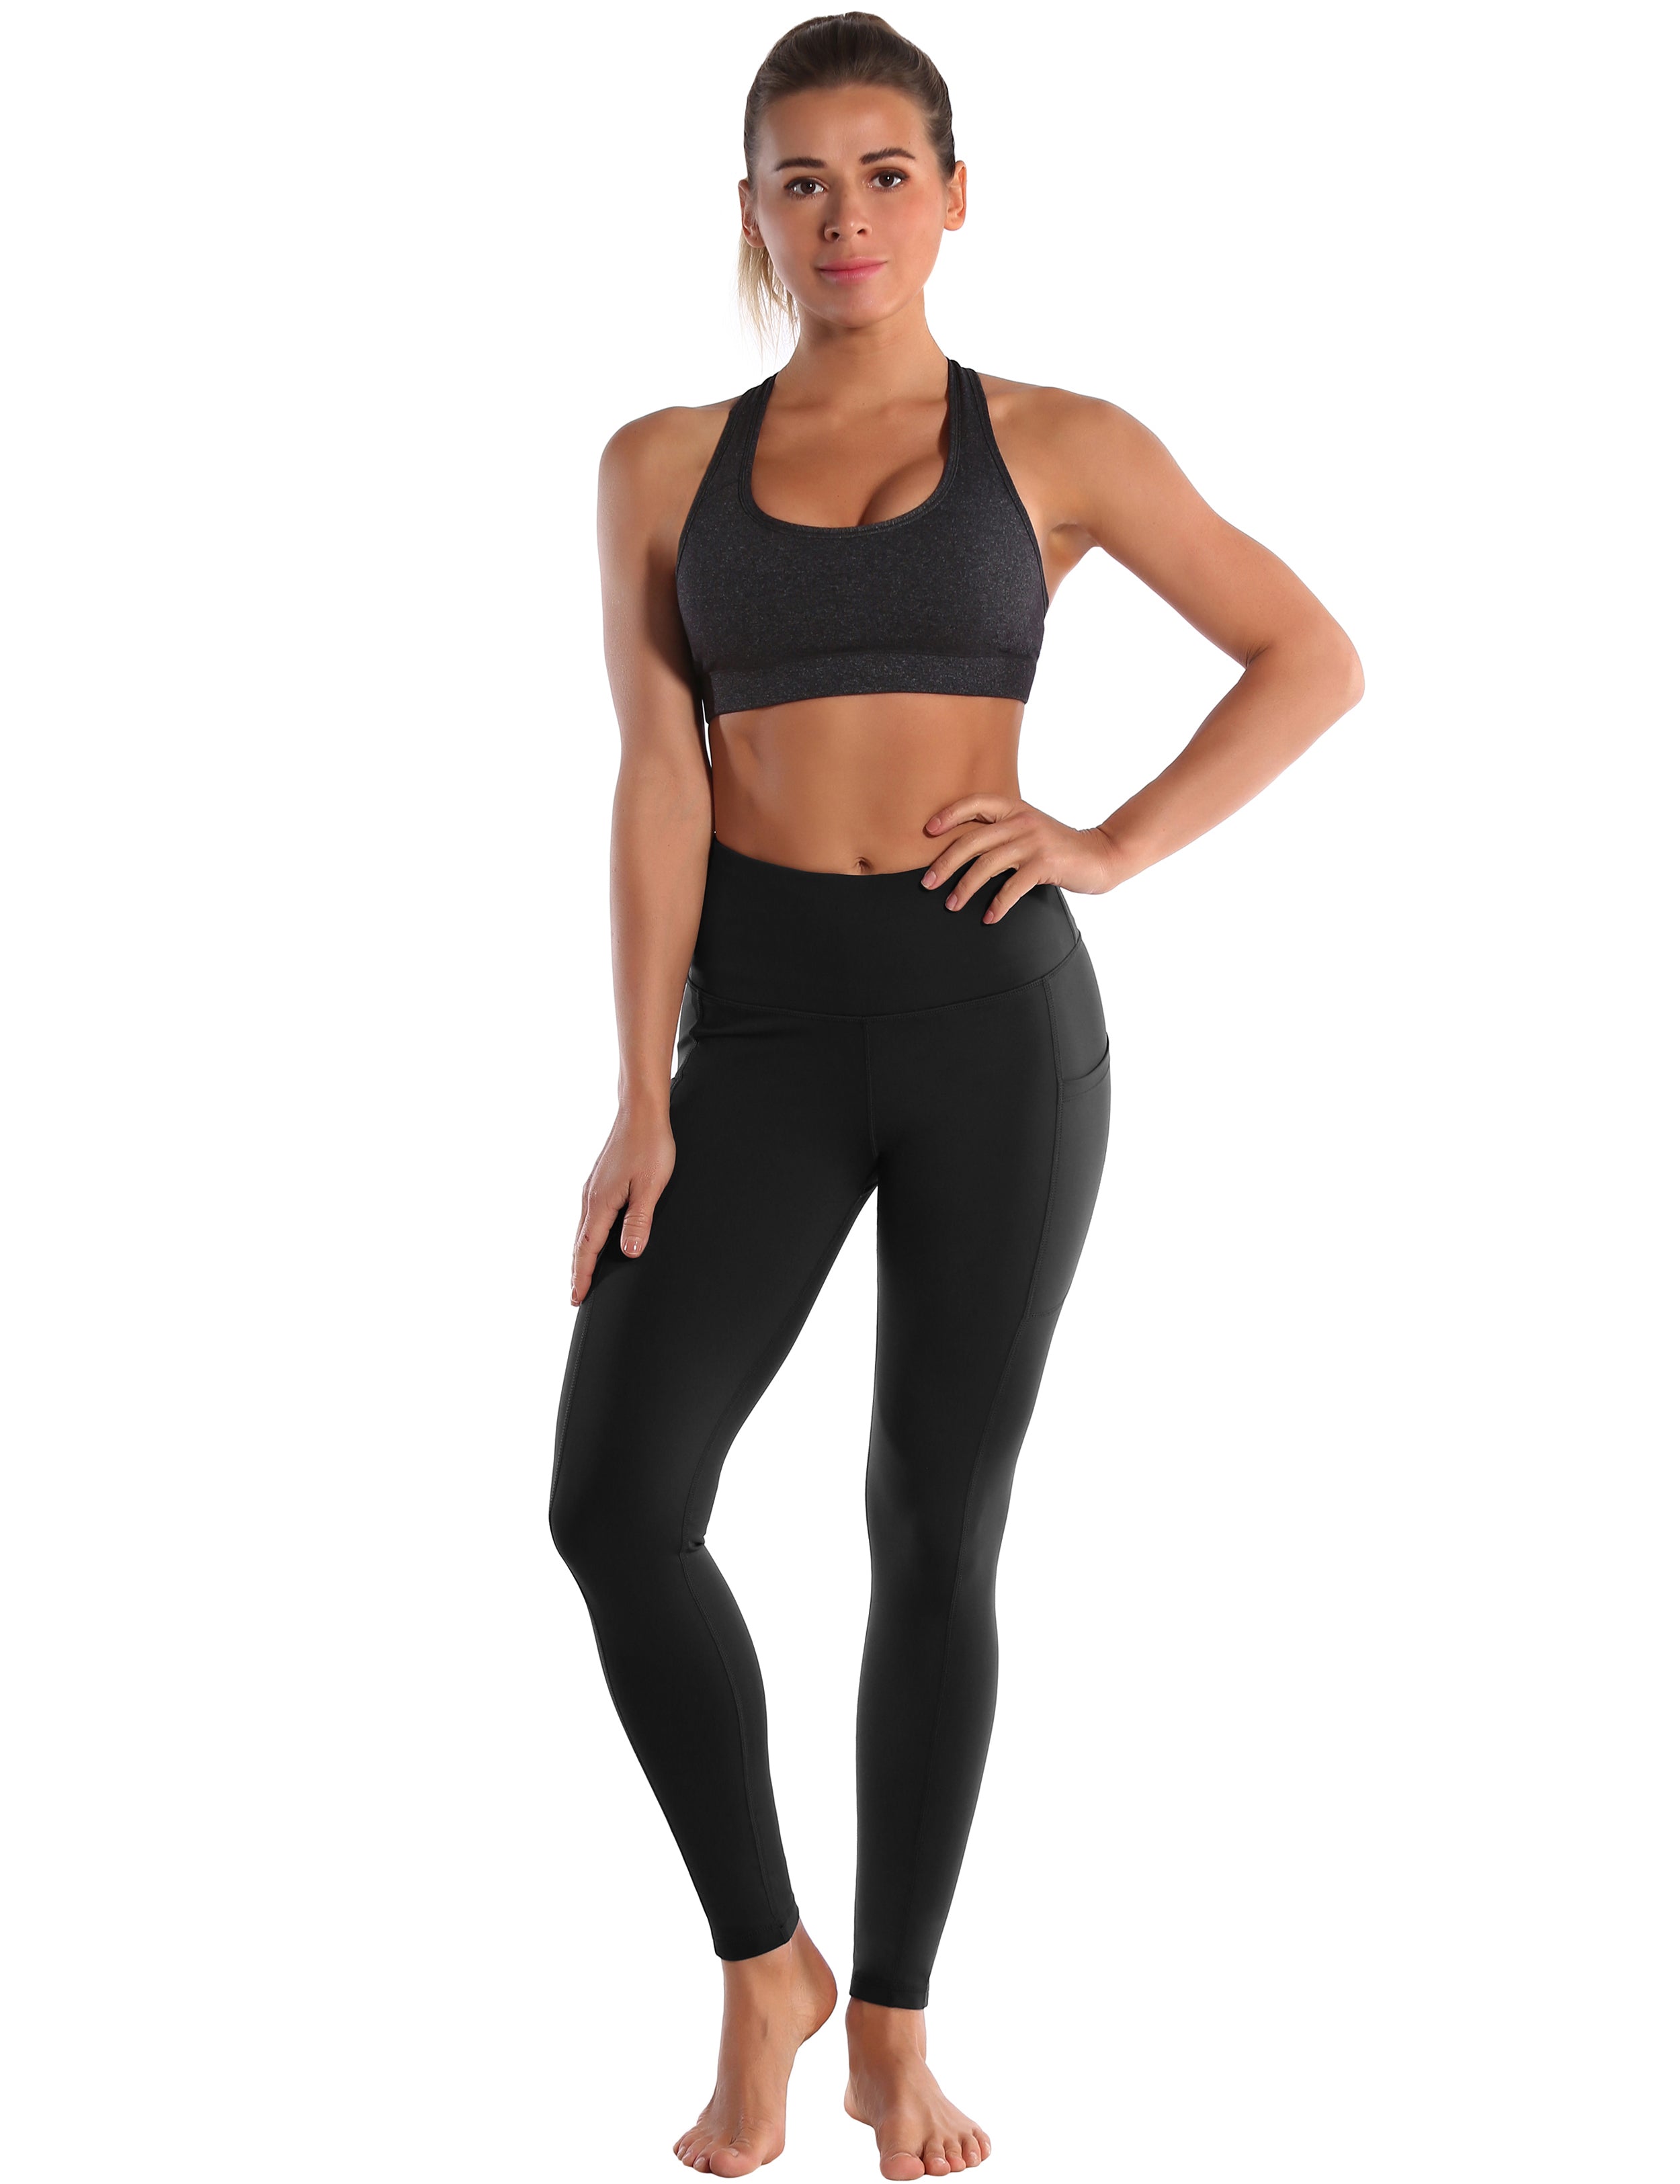 Hip Line Side Pockets Gym Pants black Sexy Hip Line Side Pockets 75%Nylon/25%Spandex Fabric doesn't attract lint easily 4-way stretch No see-through Moisture-wicking Tummy control Inner pocket Two lengths